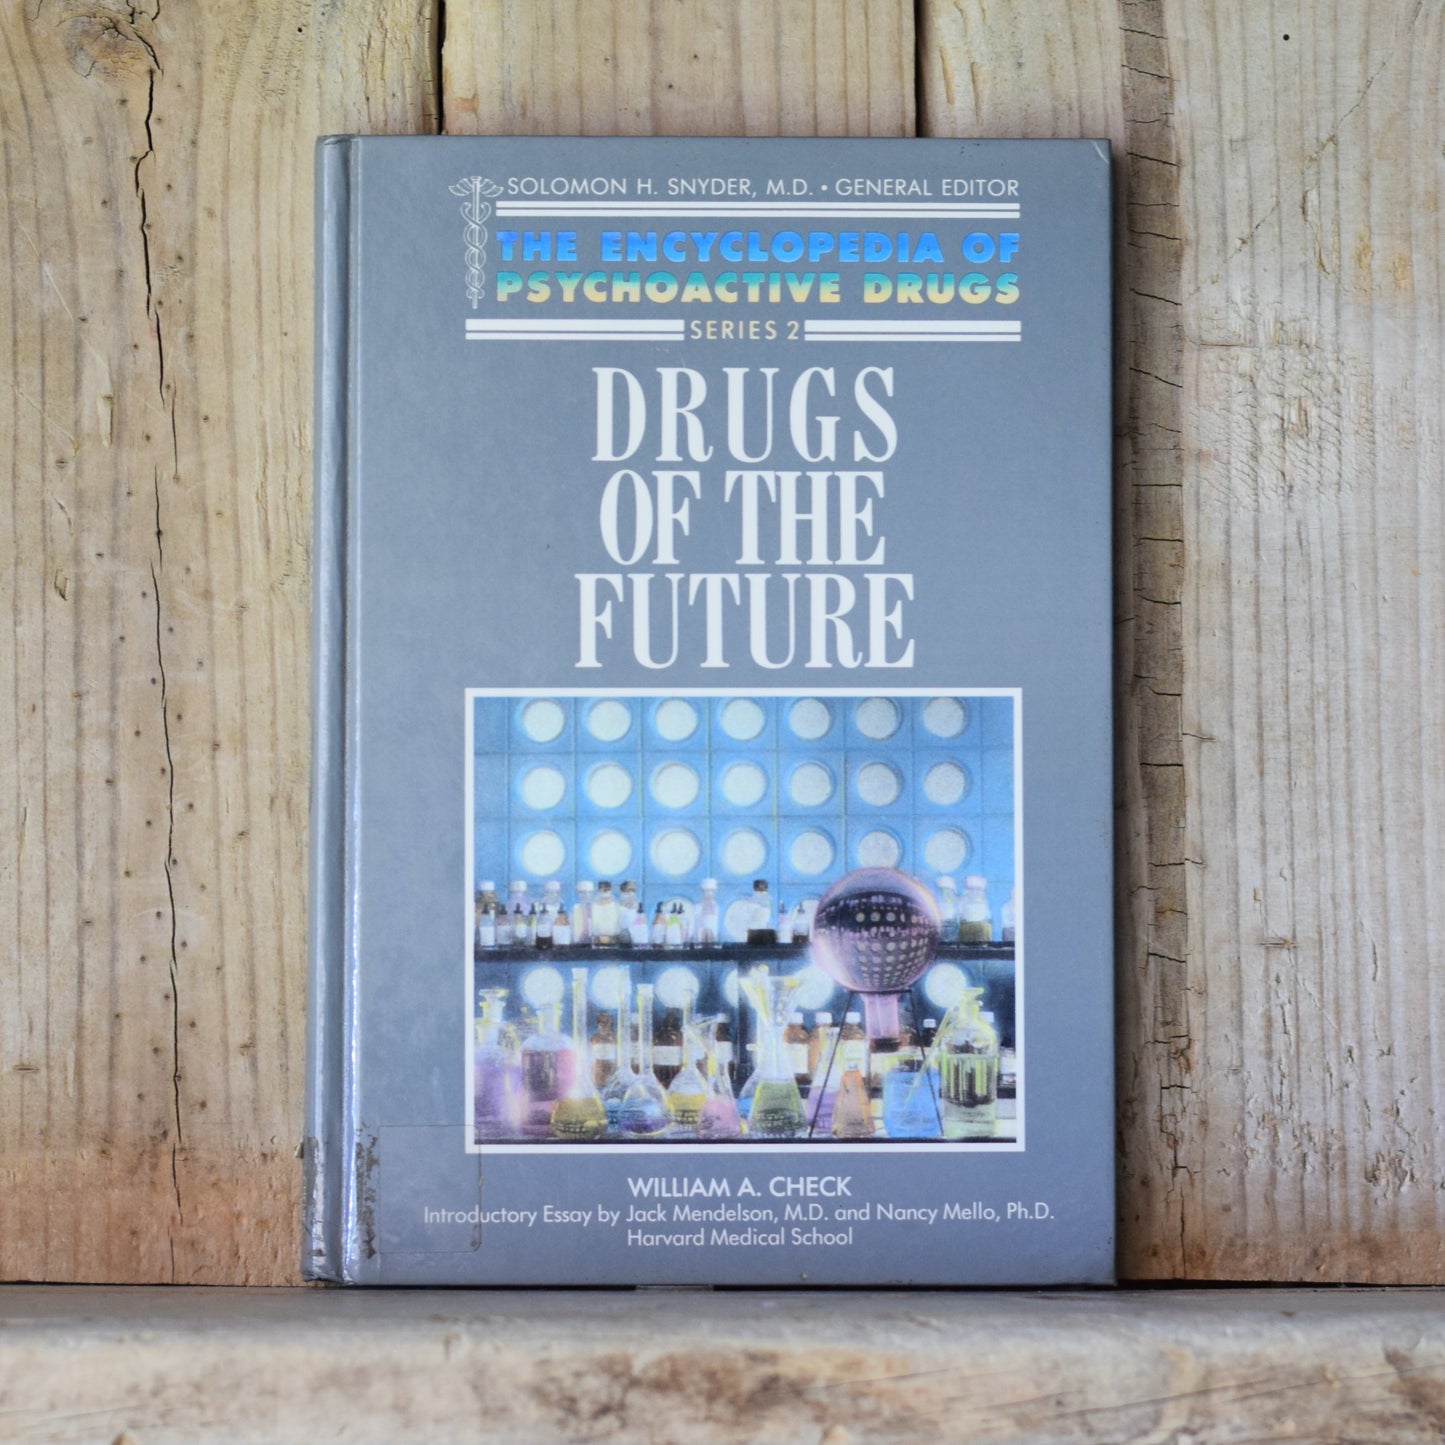 Non-fiction Hardback: William A Check - Drugs of the Future, The Encyclopedia of Psychoactive Drugs, Series 2